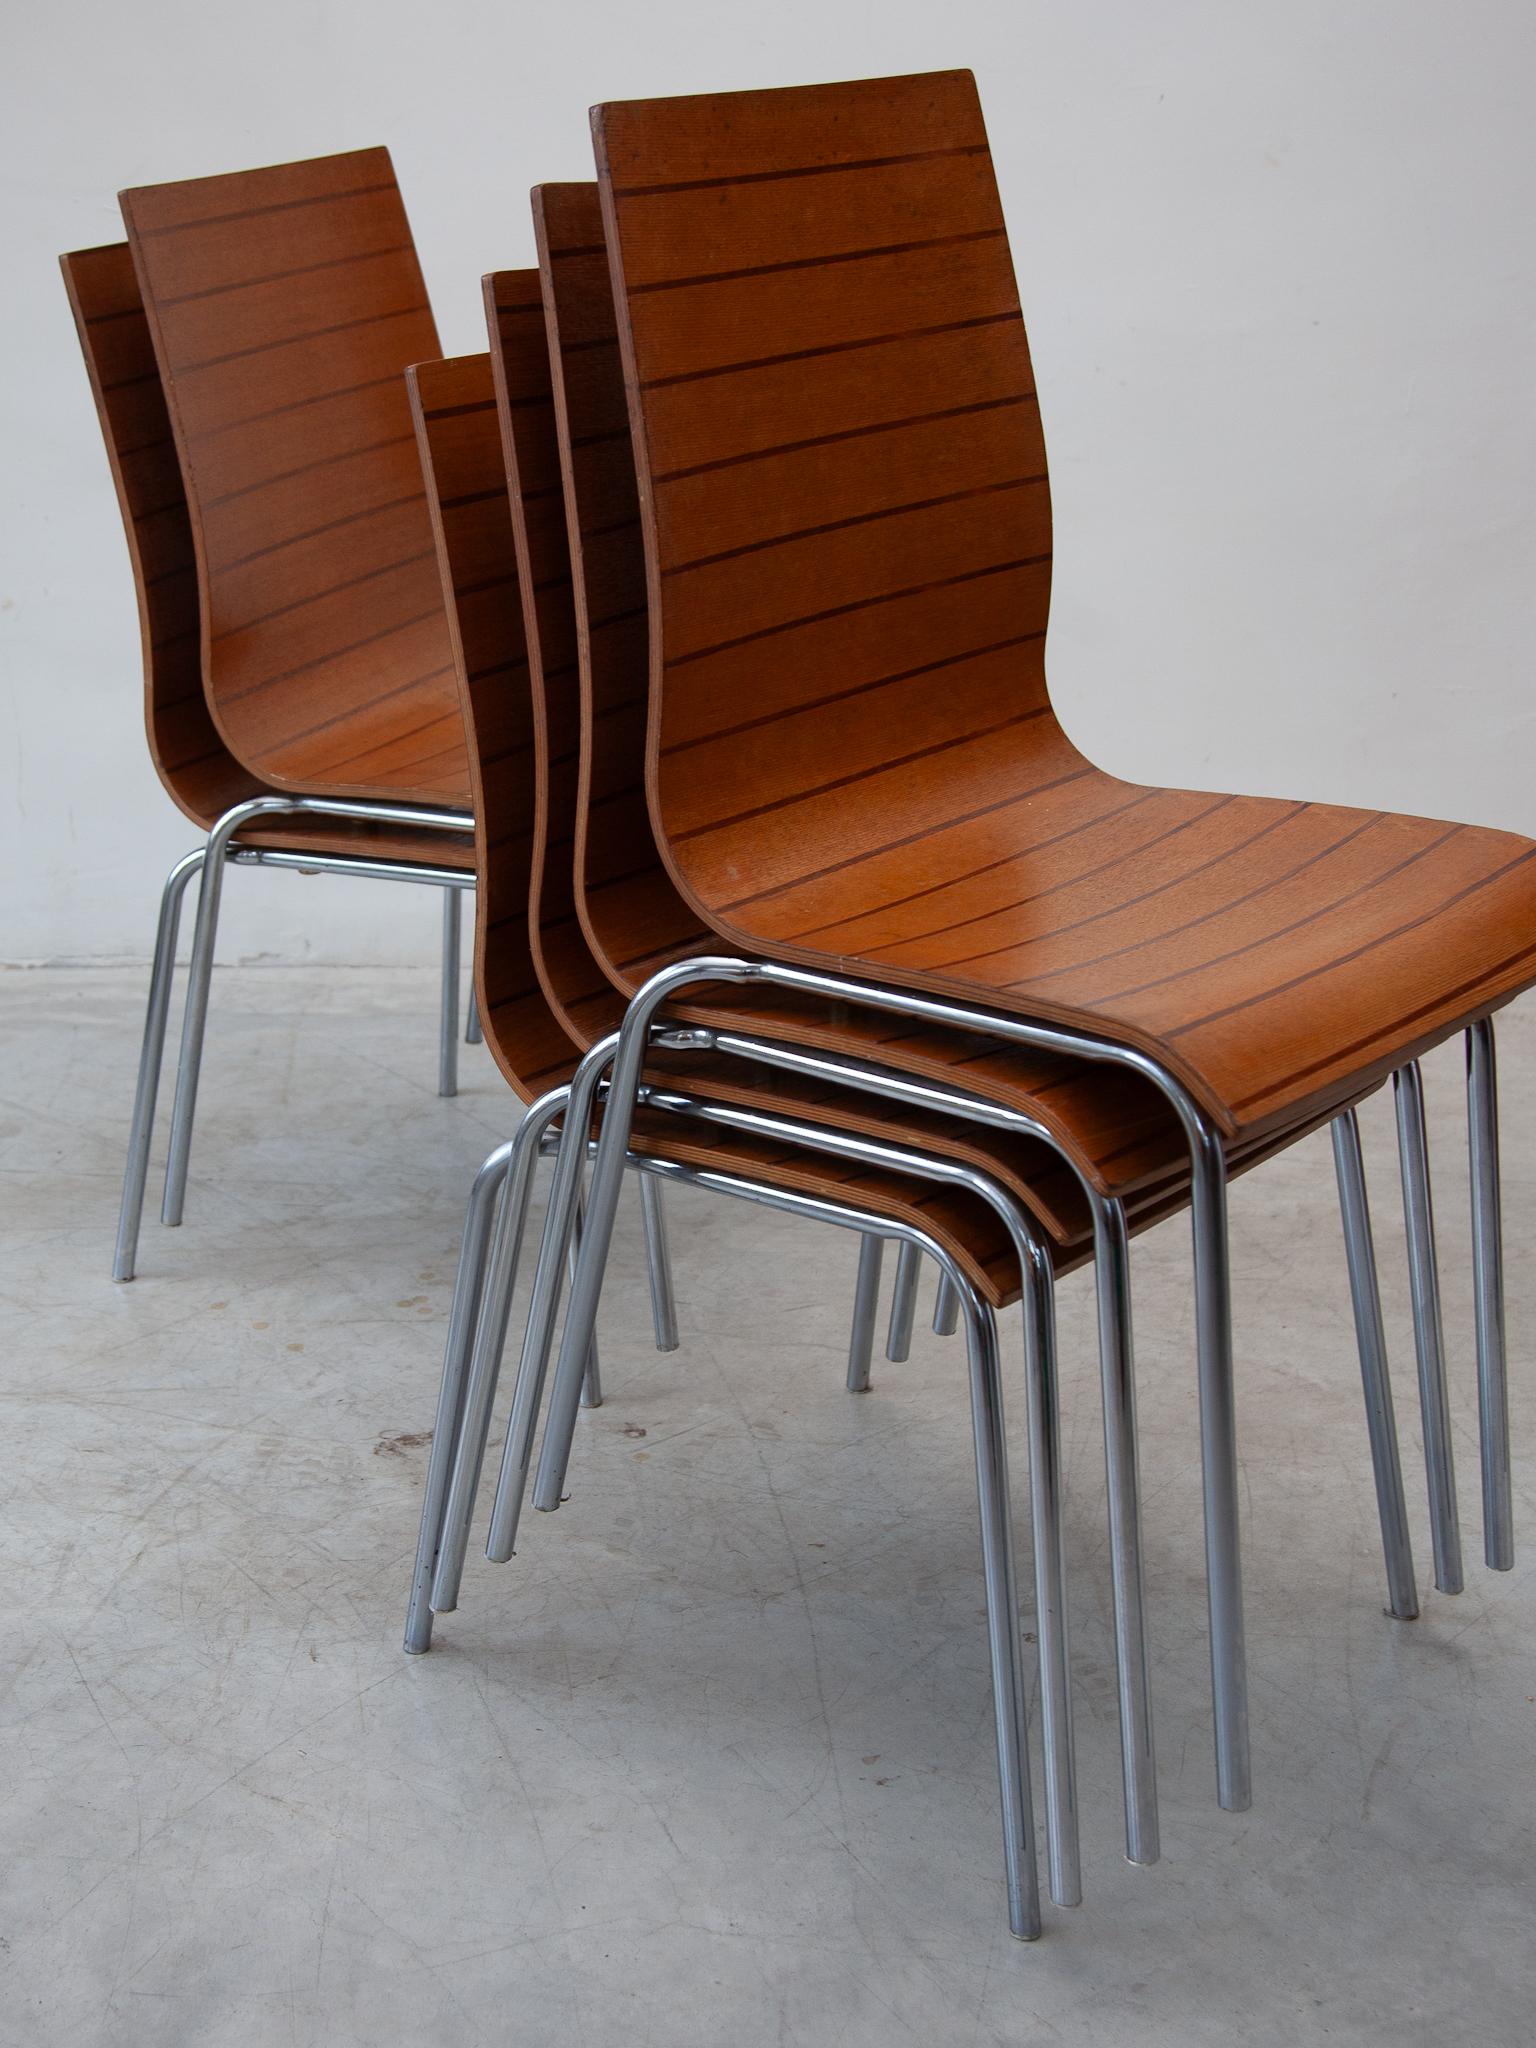 Set of Six High Back Stacking Plywood Chairs, 1980s For Sale 6